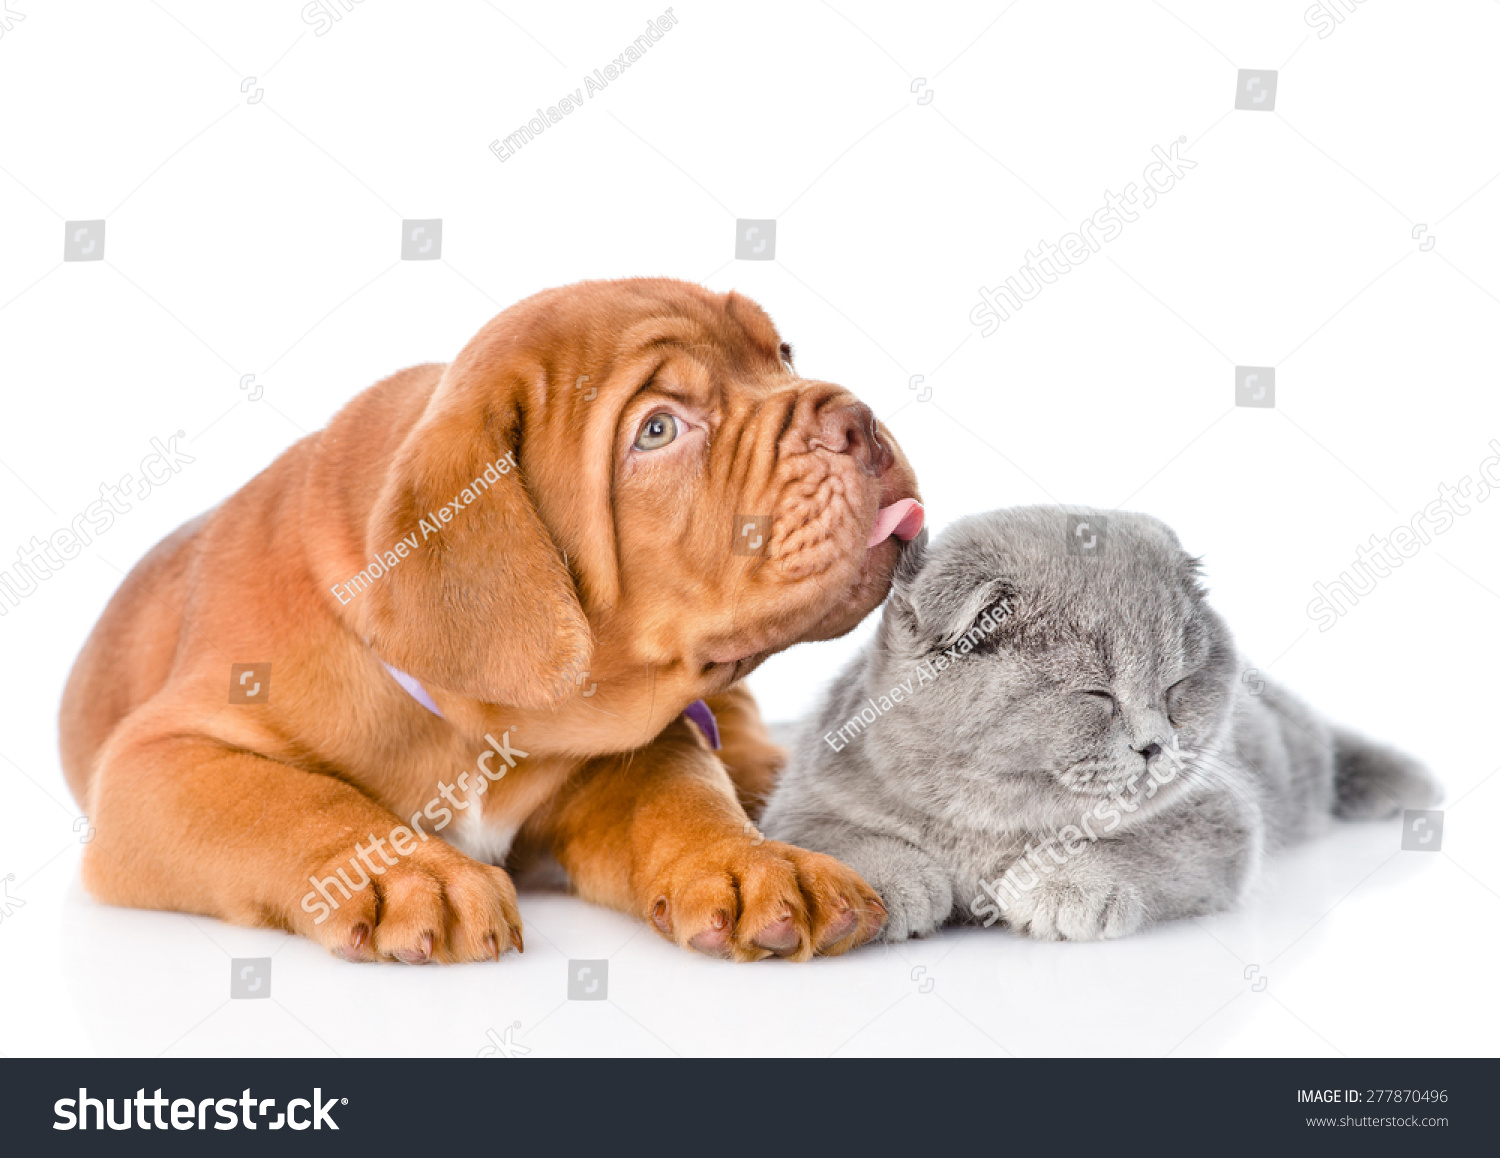 Bordeaux puppy licking cat. isolated on white background #277870496